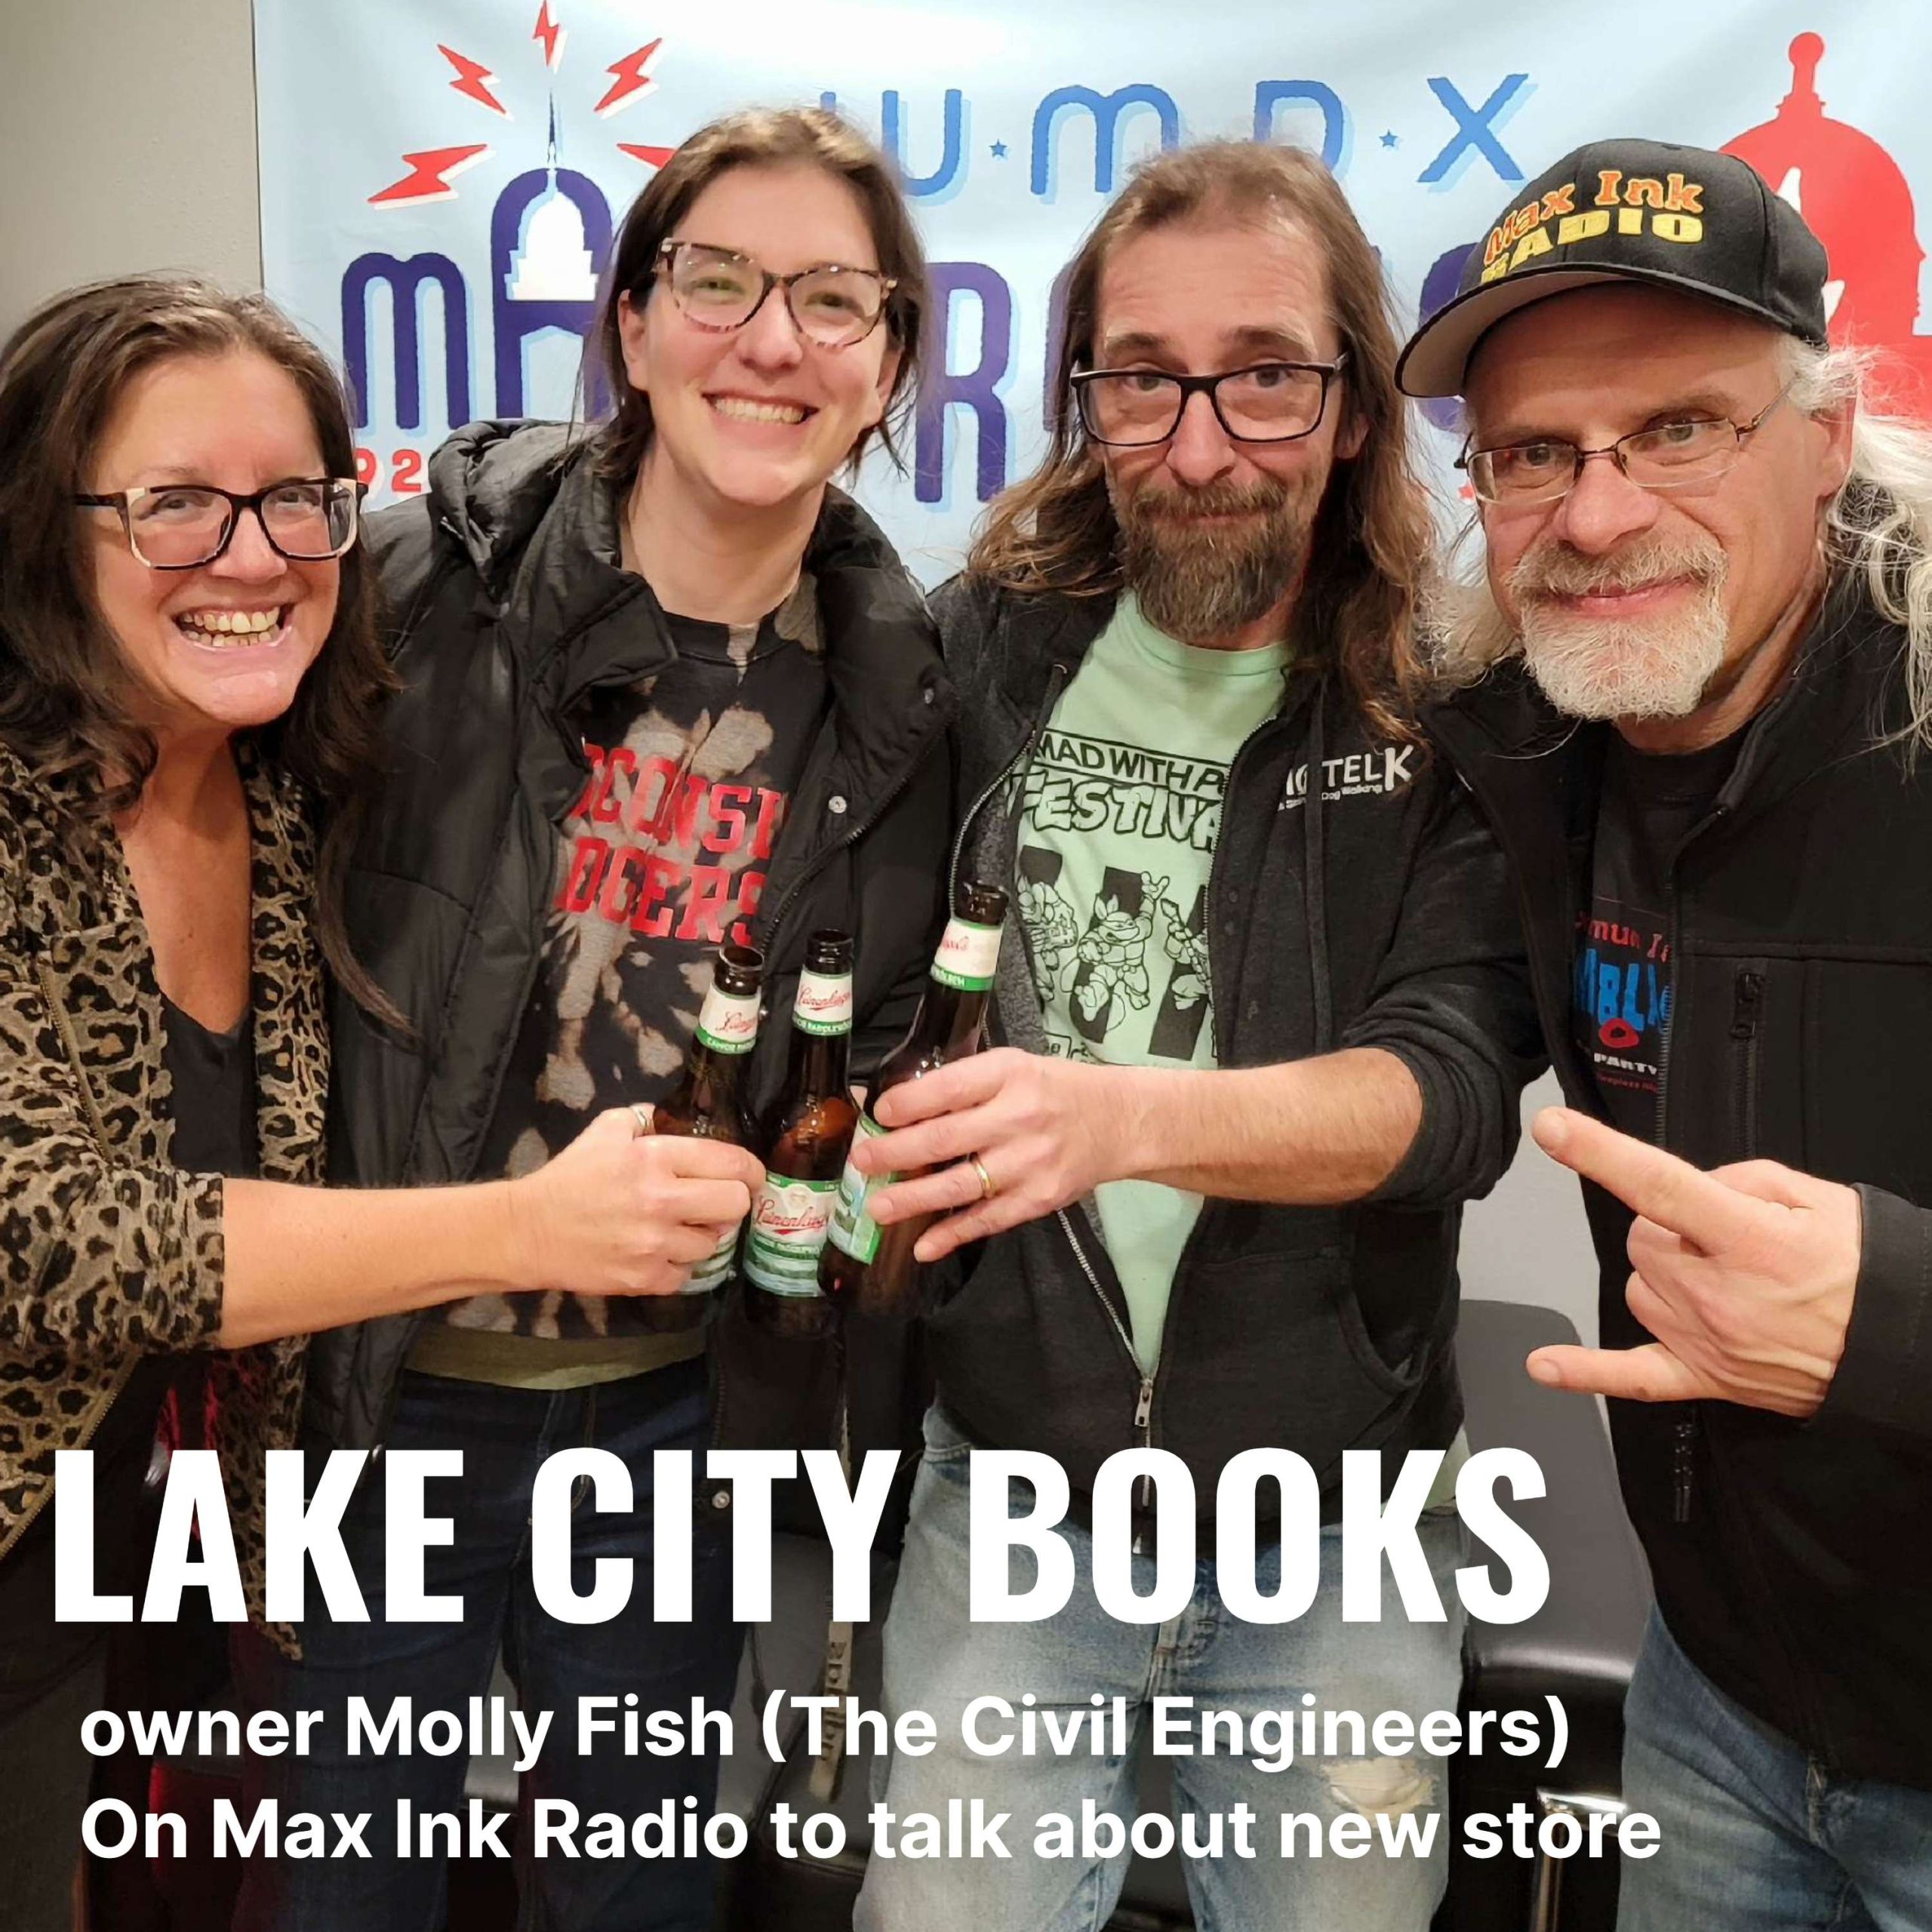 Molly Fish of Lake City Books with the Max Ink Radio crew